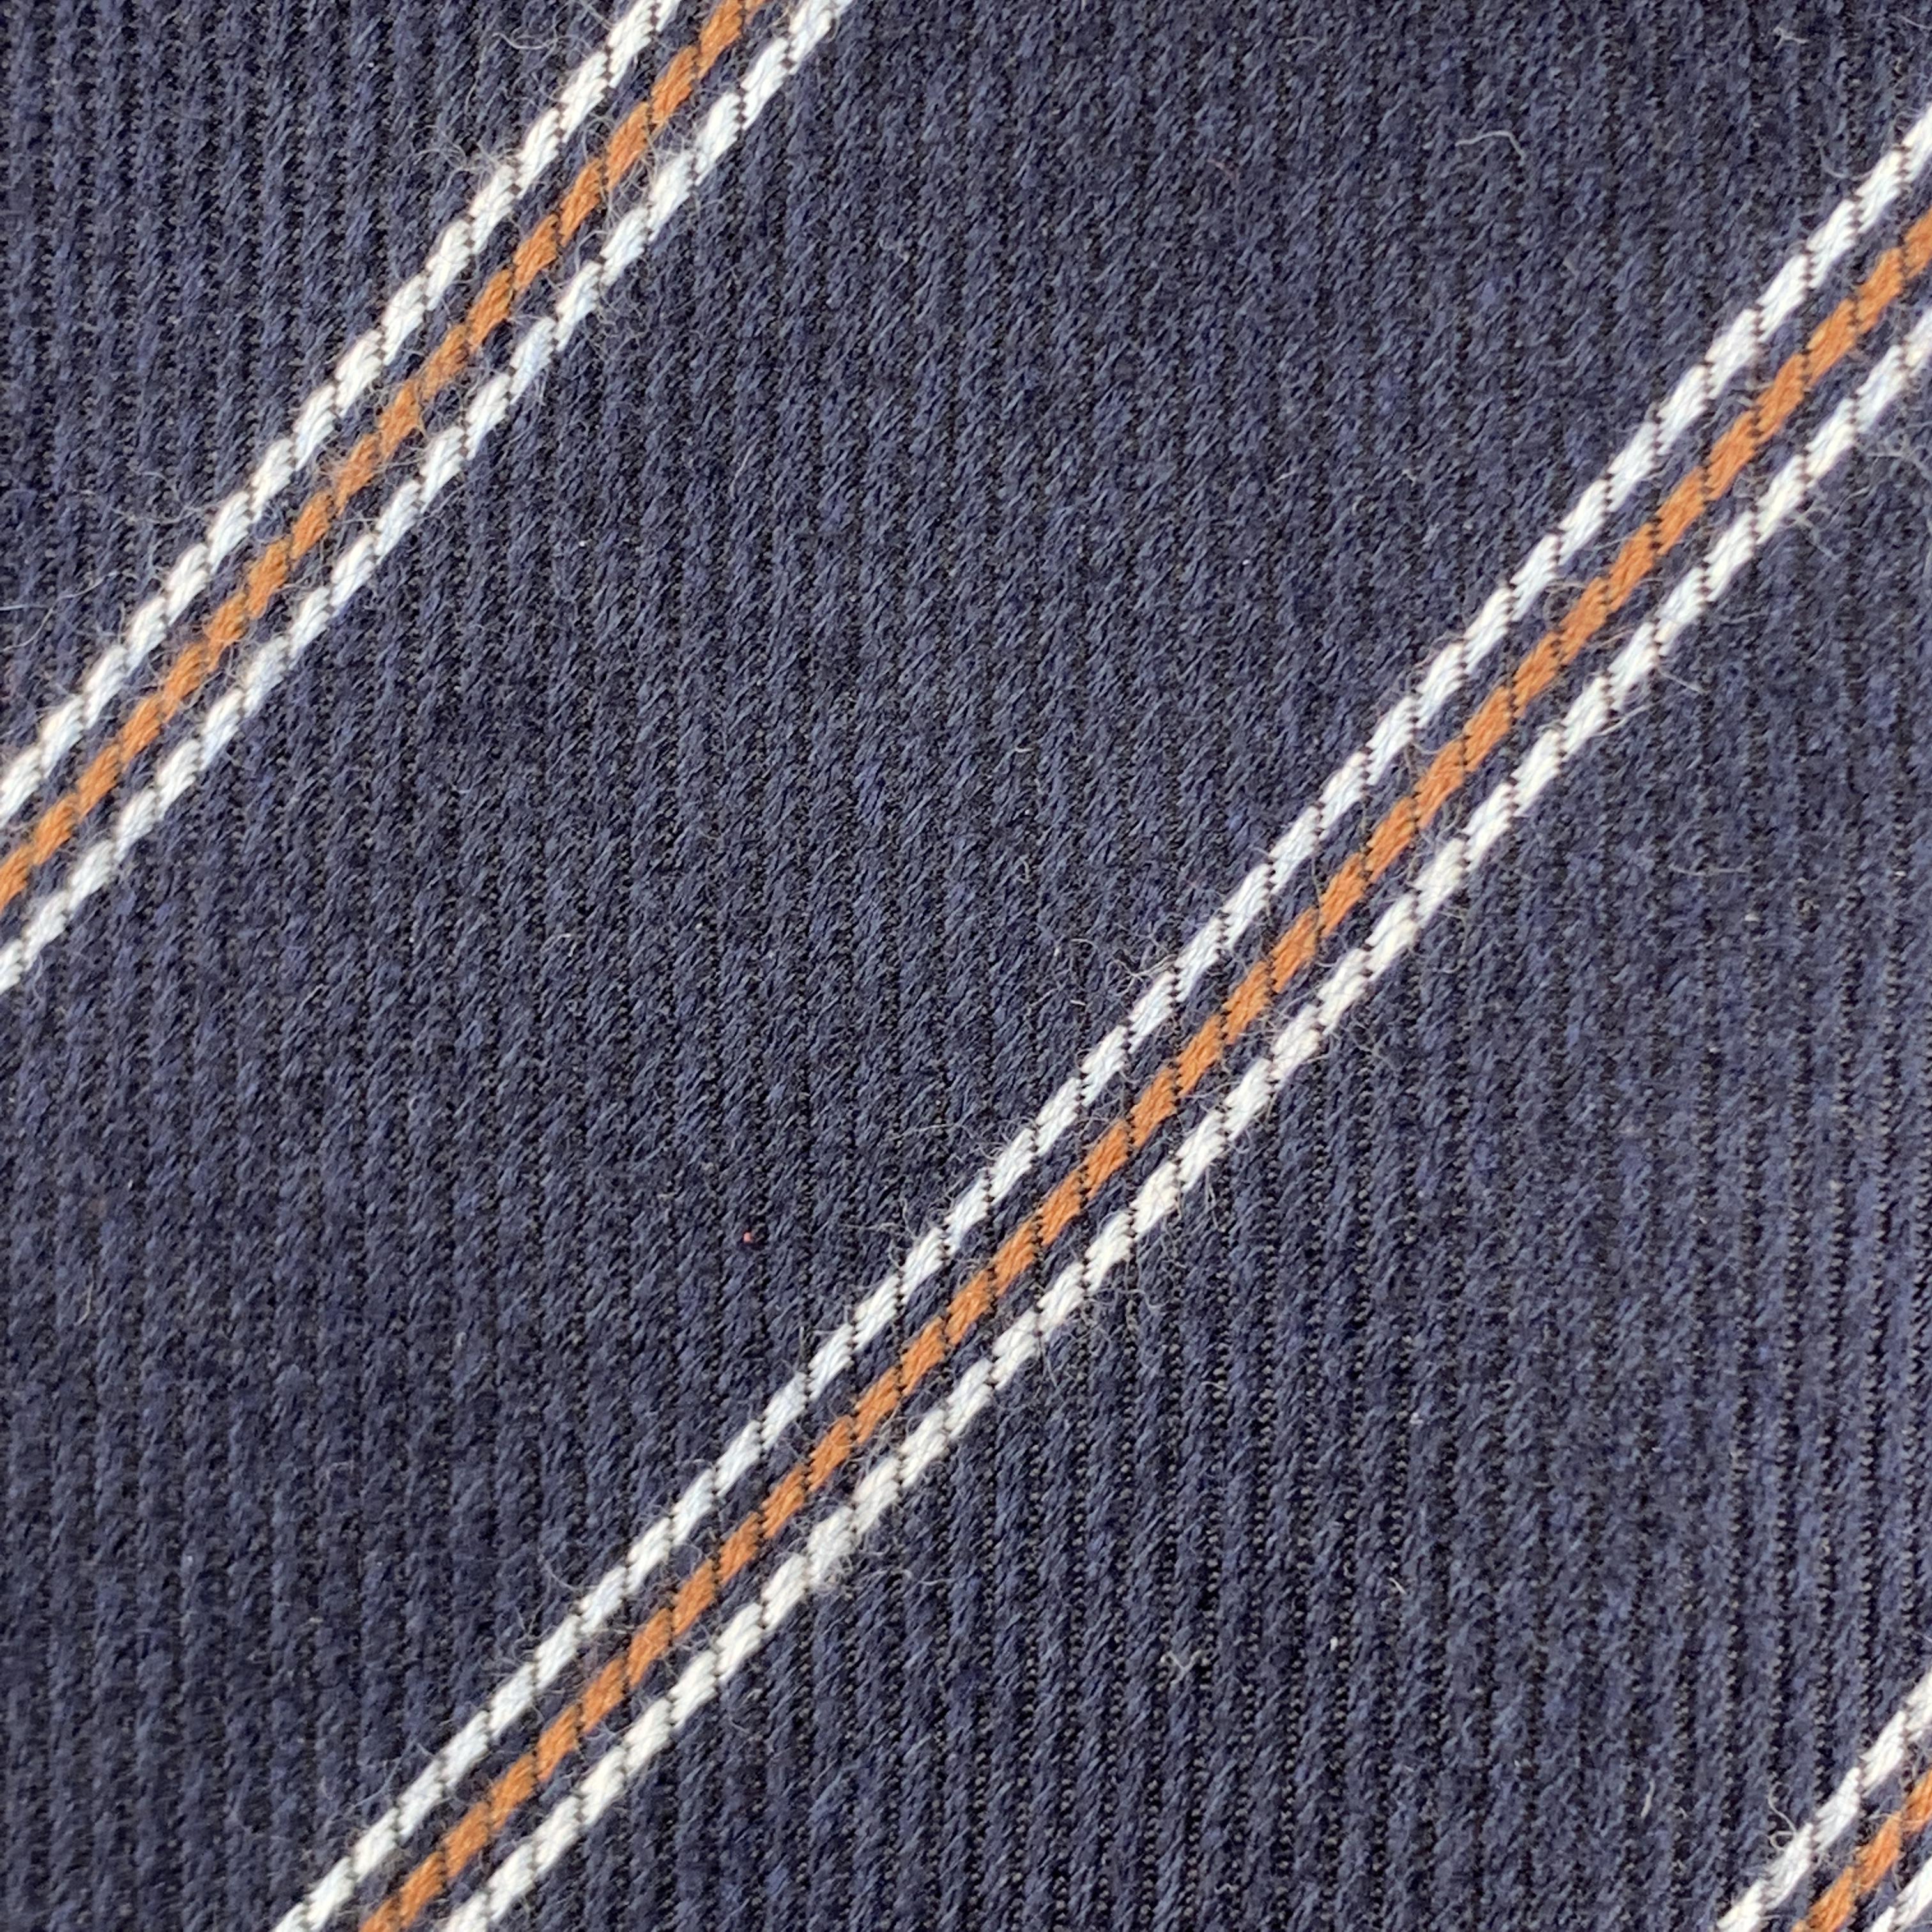 LUIGI BORELLI necktie comes in navy silk cashmere blend with all over diagonal striped print. Made in Italy.

Very Good Pre-Owned Condition.

Width: 3.5 in.